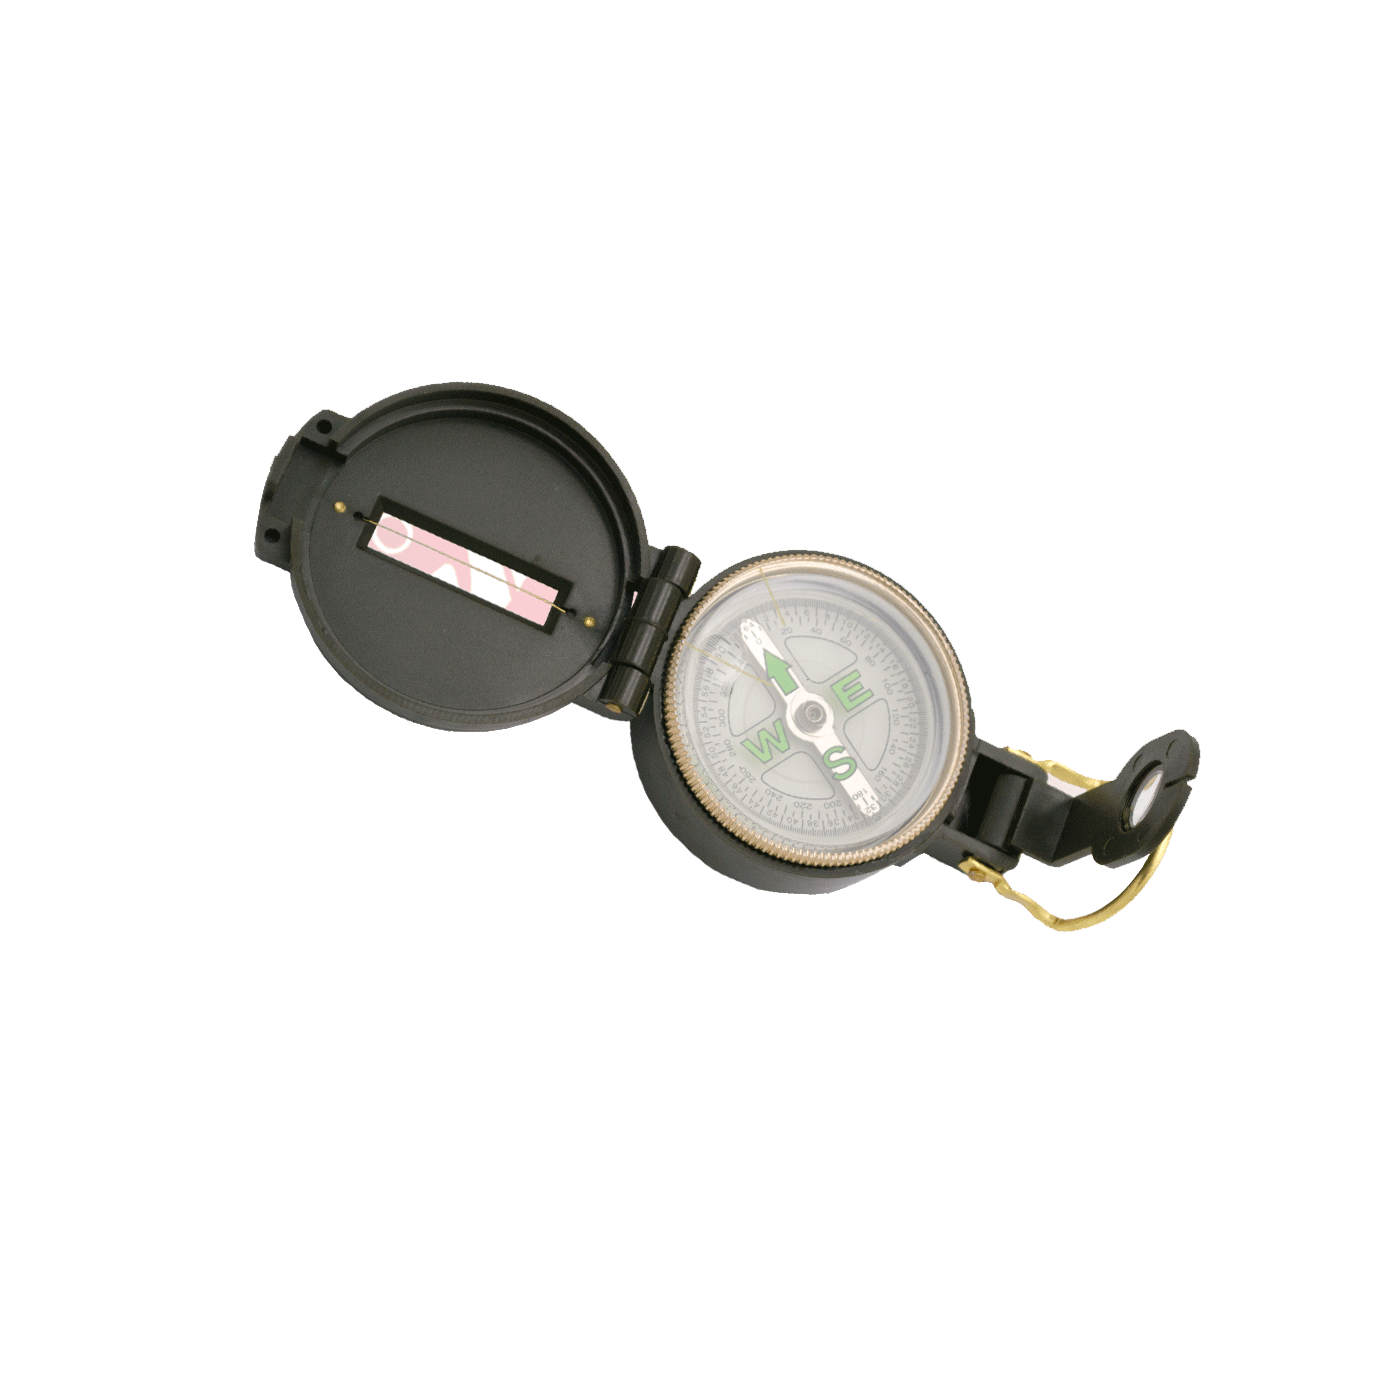 COMPASS IN MILITARY GREEN PLASTIC